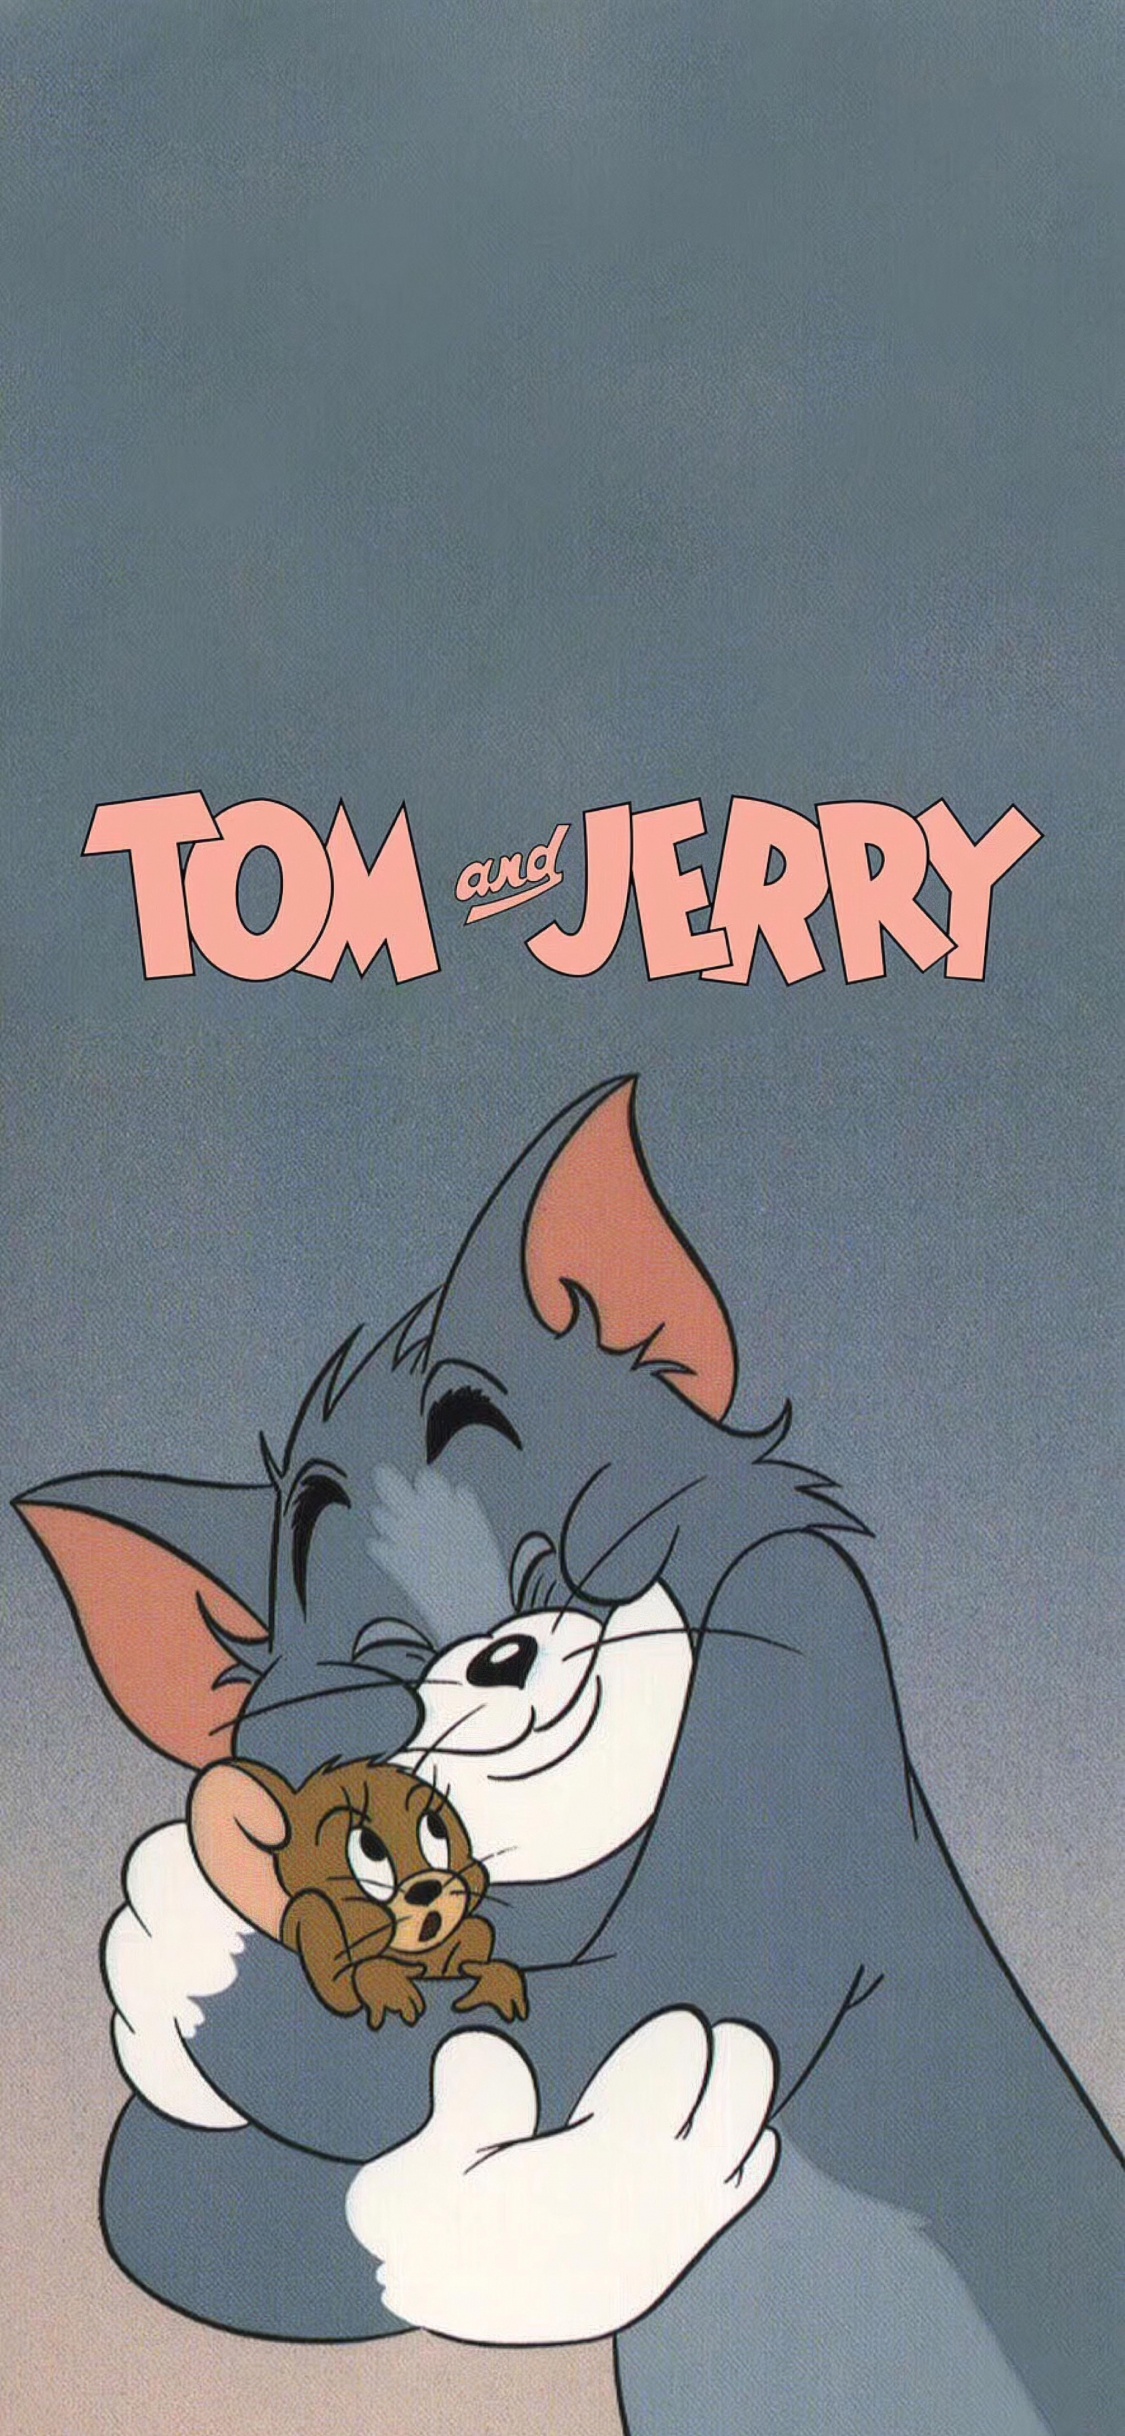 Tom and Jerry Aesthetic, Tom Cat, Jerry Mouse, Aesthetics, Cartoon. Wallpaper in 1125x2436 Resolution